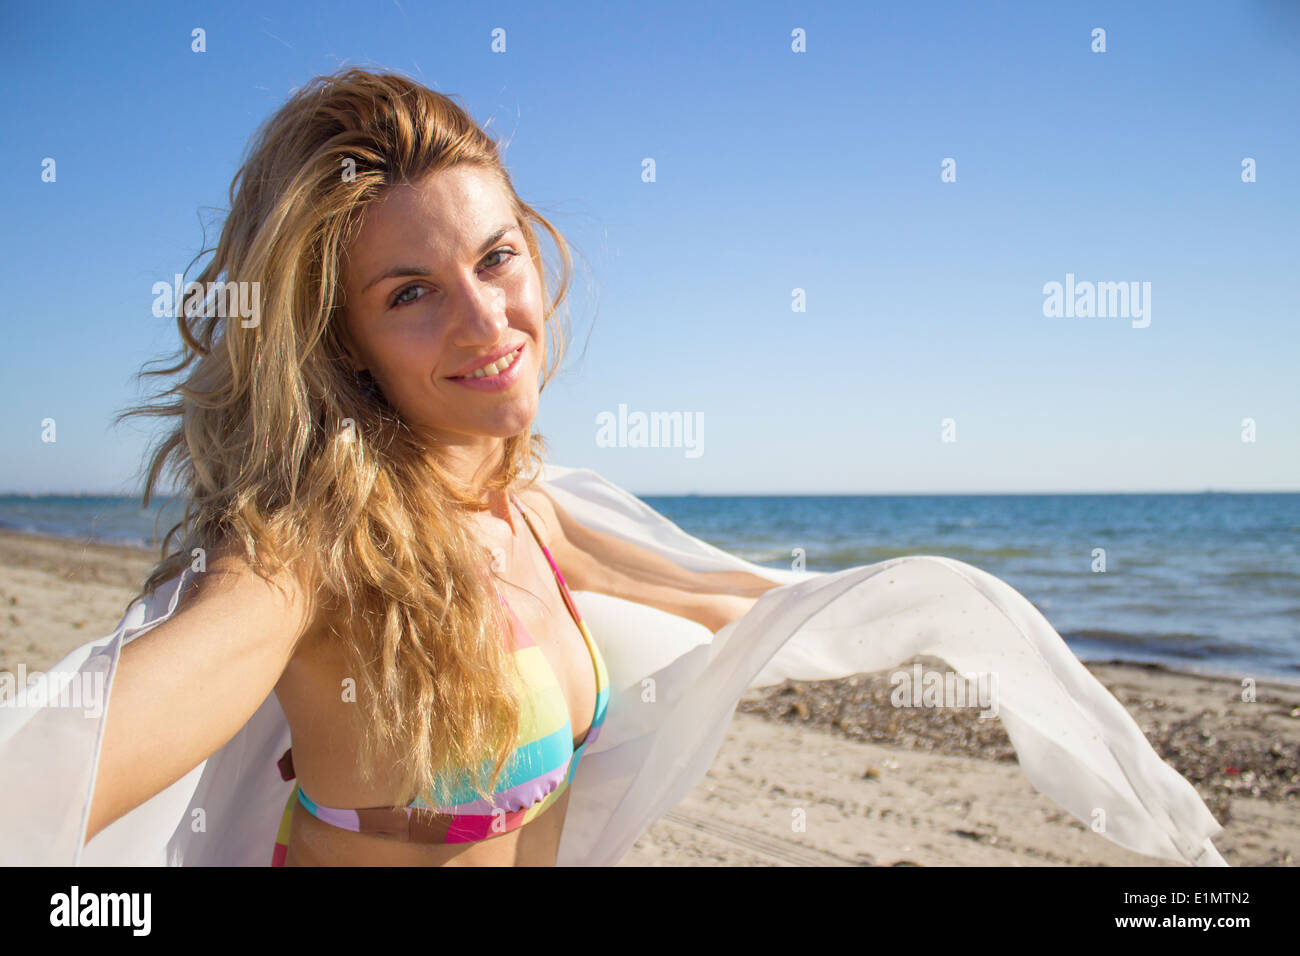 smiling young woman summer beach sea ocean white fabric Stock Photo